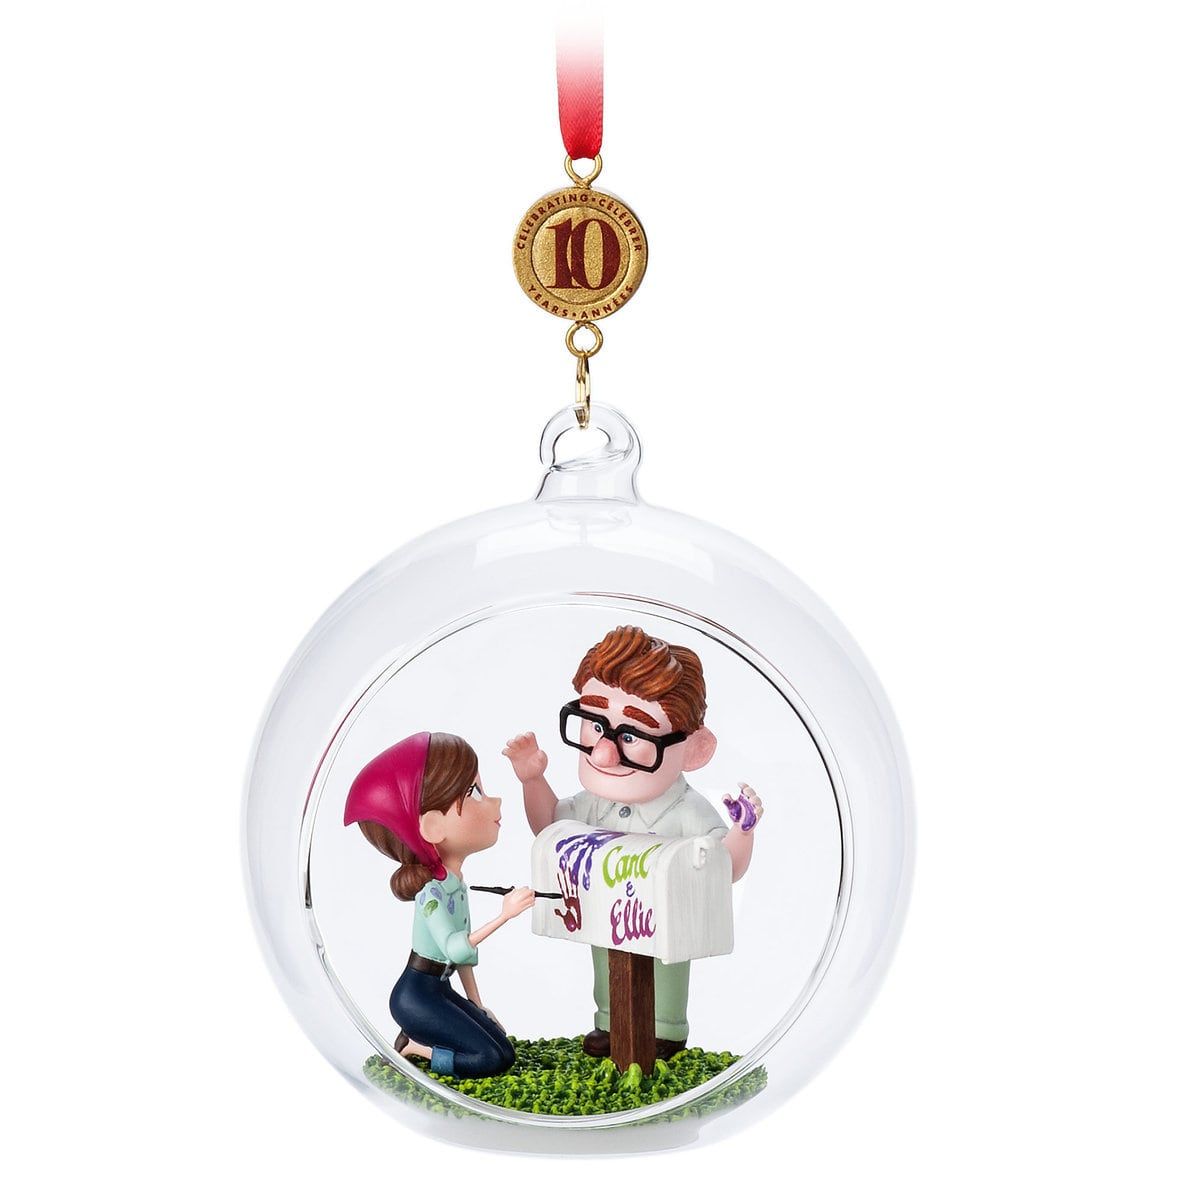 Disney 2019 Christmas Ornament Collection Reveal